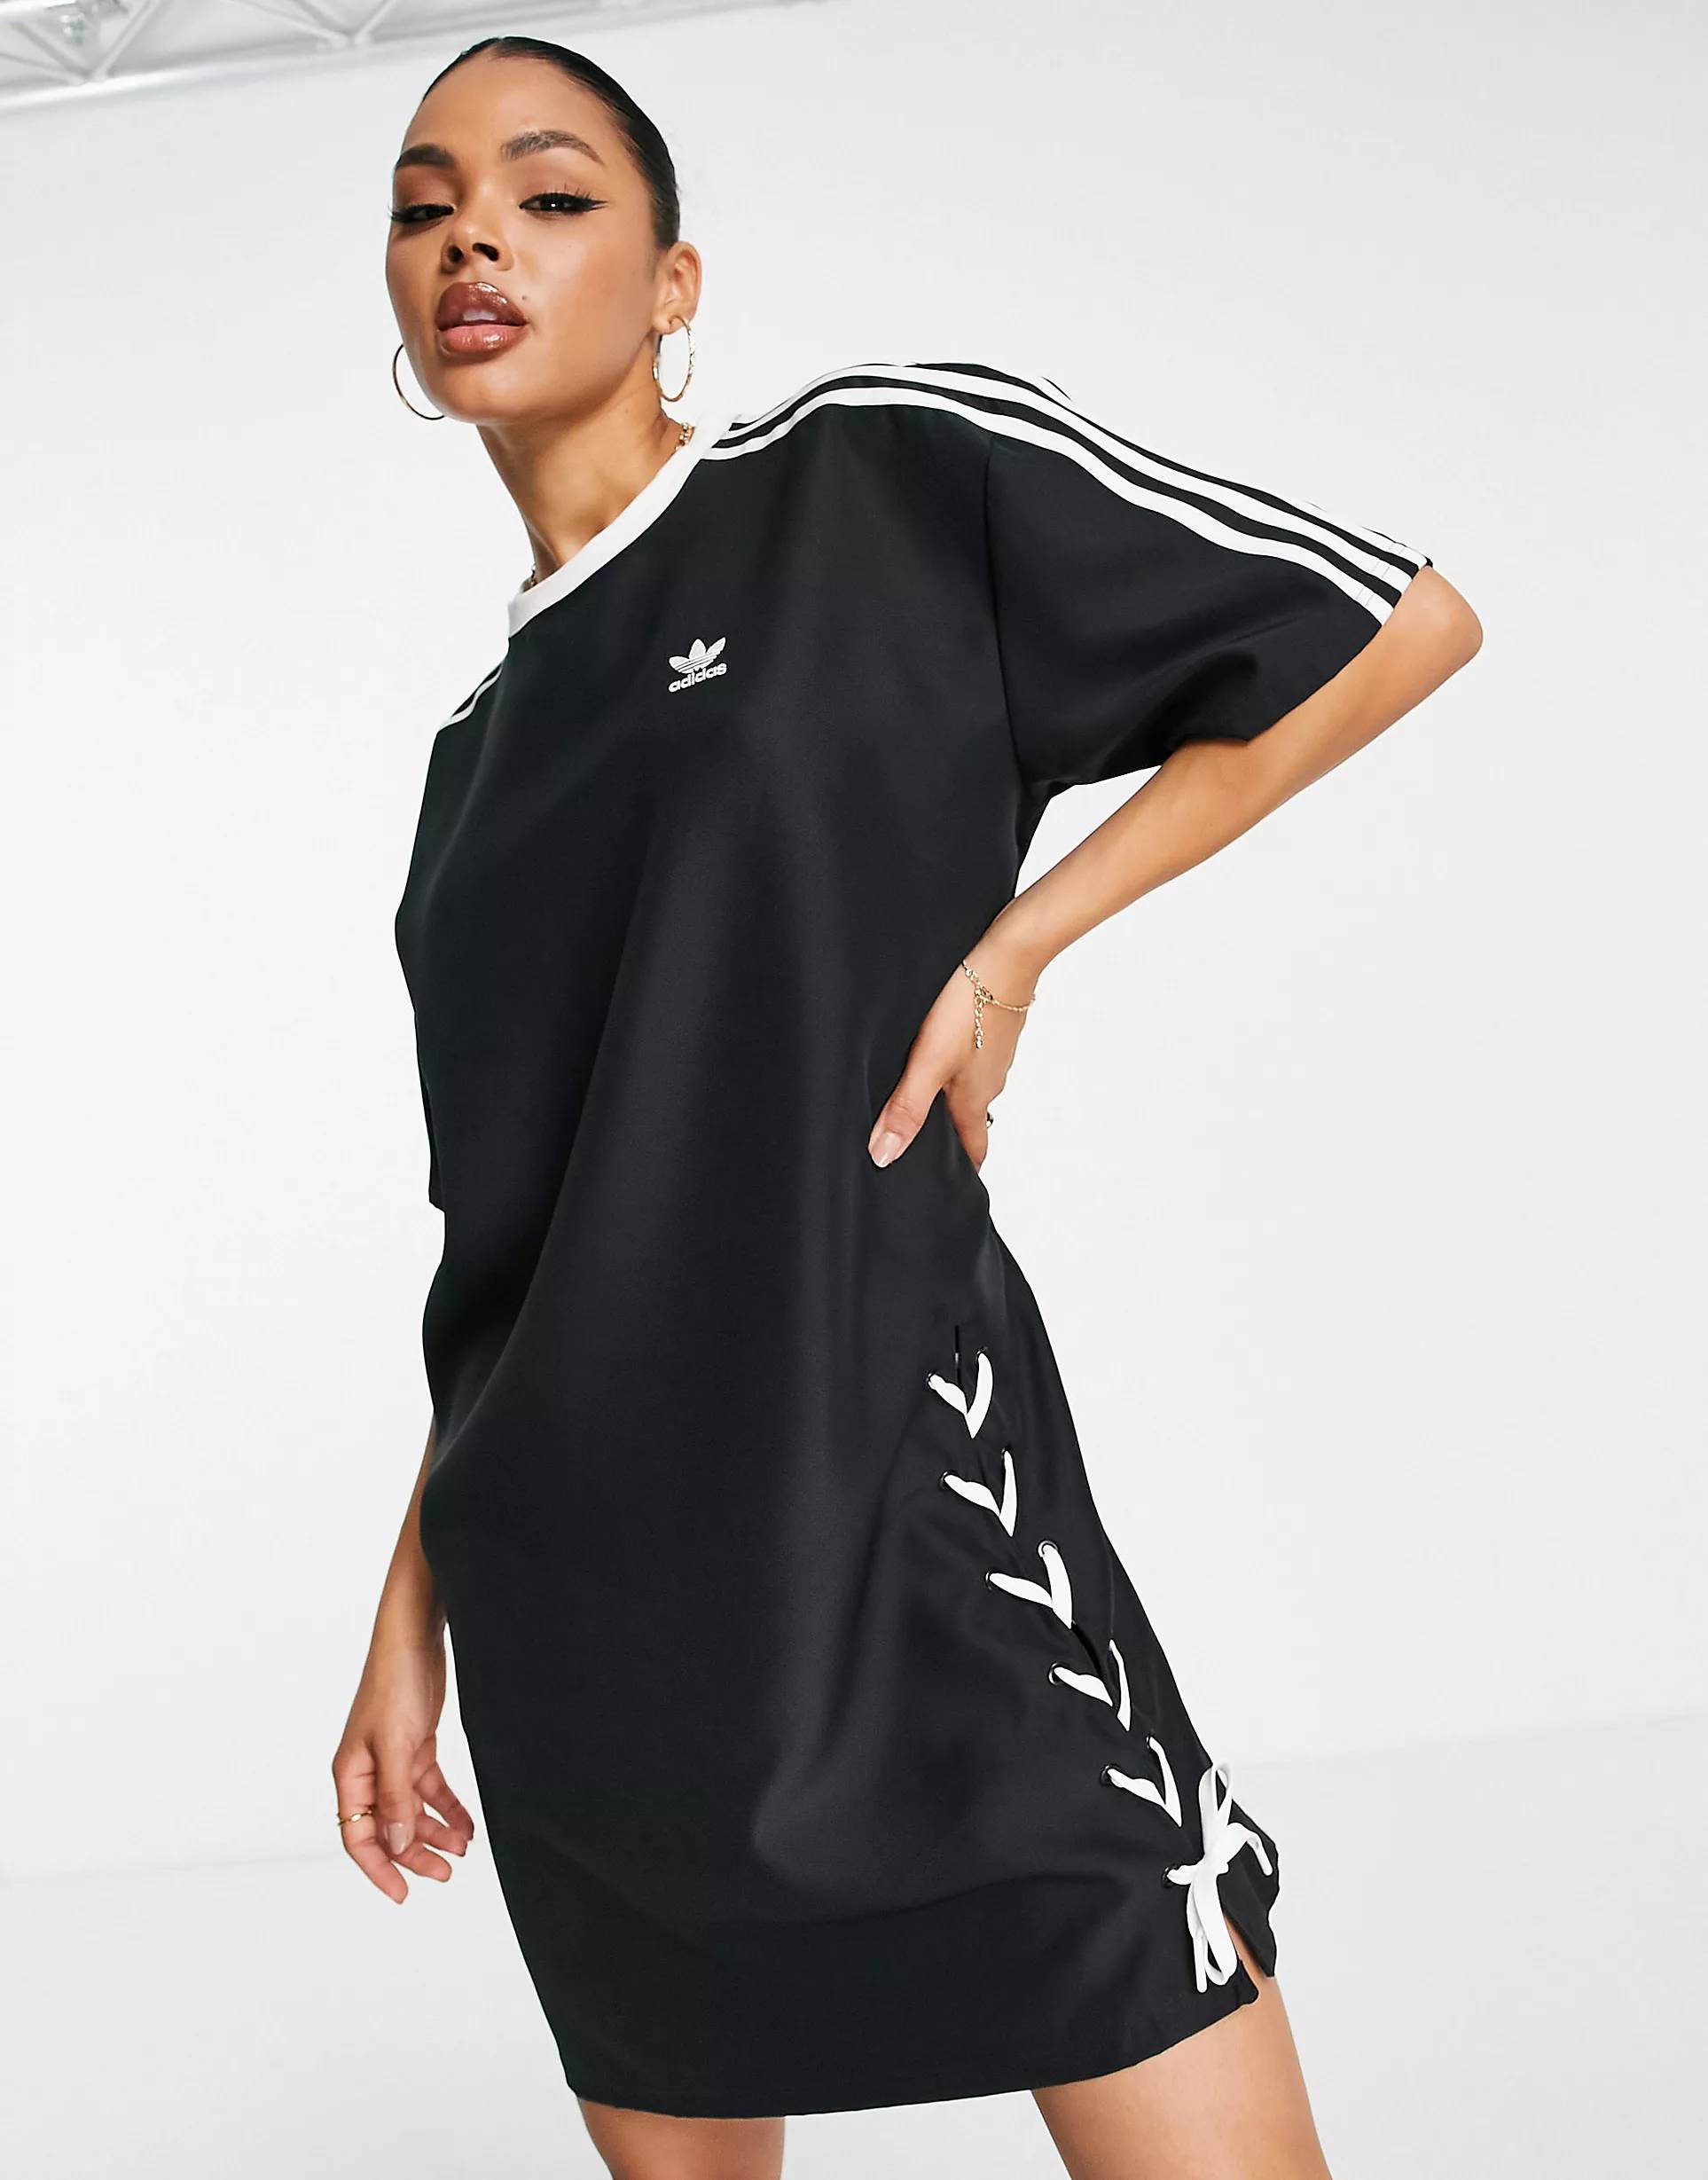 T-Shirt | adidas \'Always Where Buy Original\' Sole Dress Supplier The | To